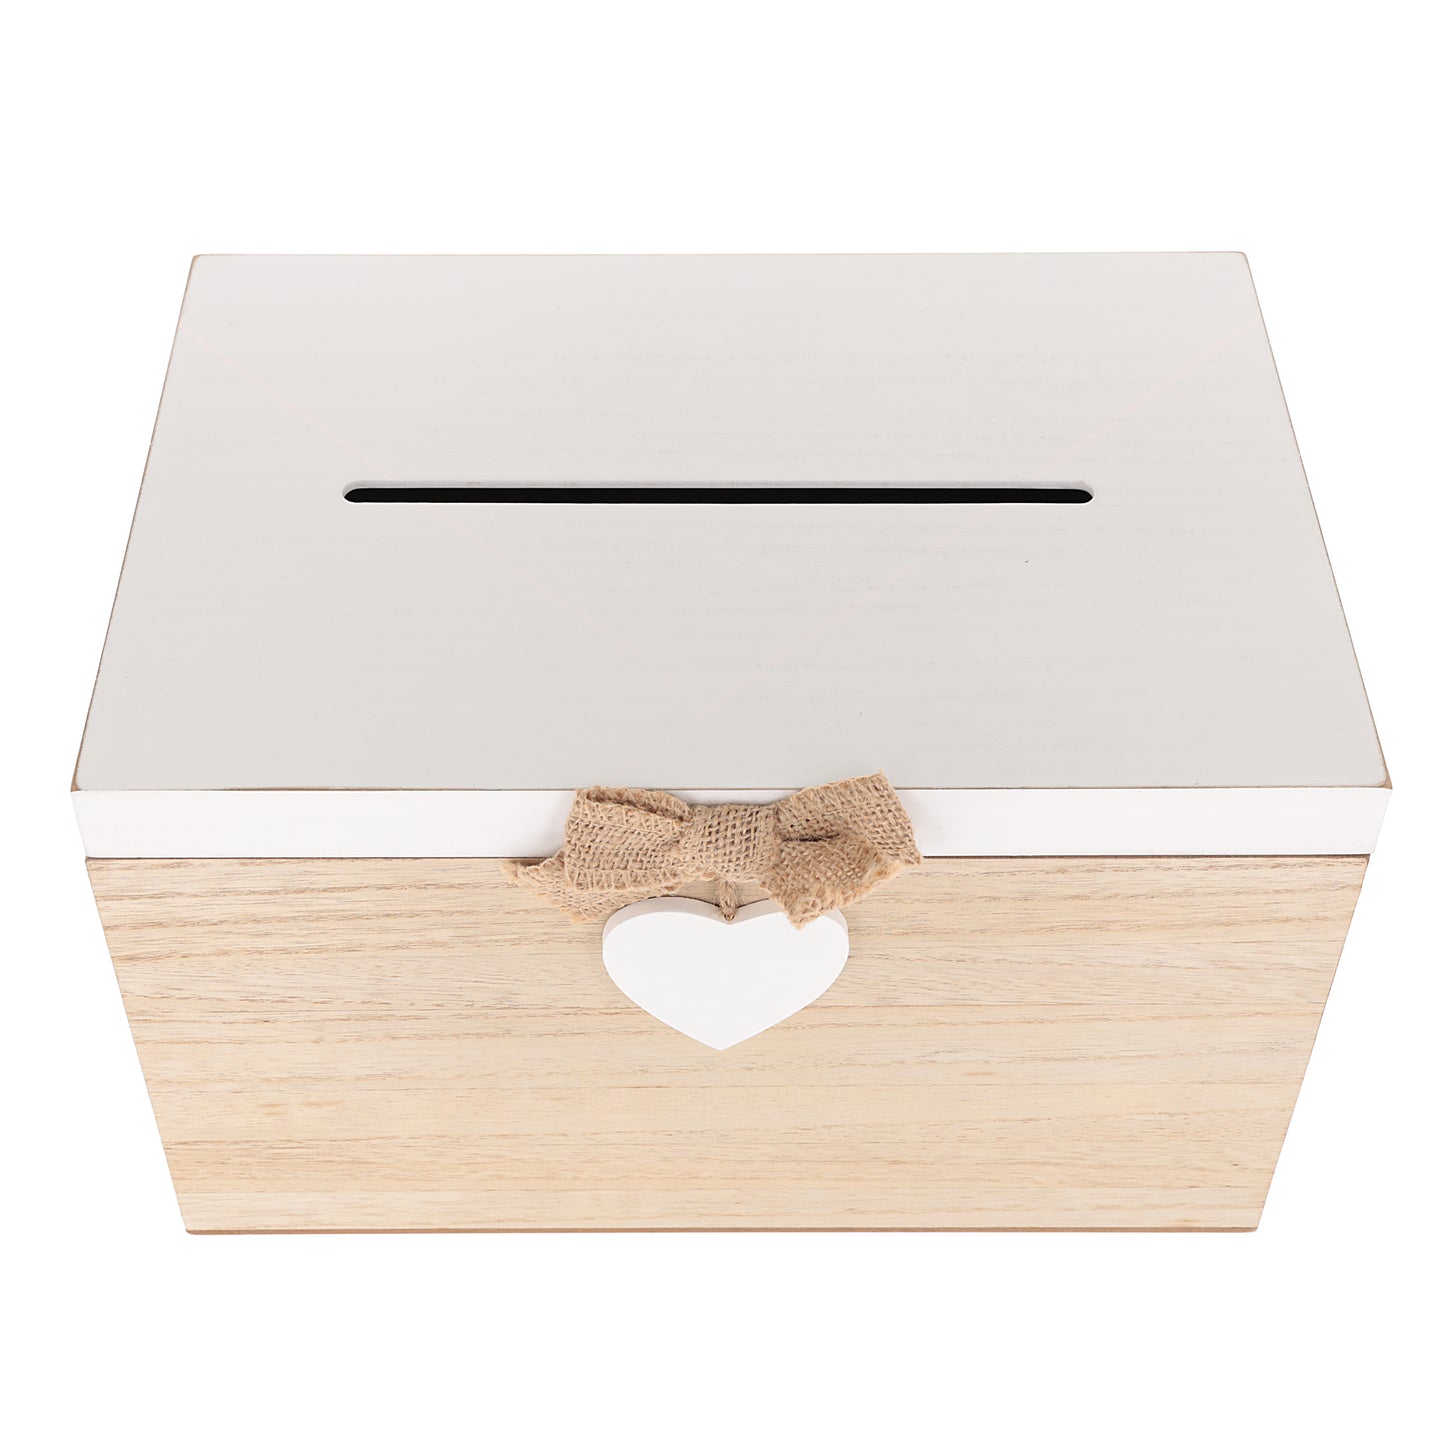 Blank Wedding or Party Card White & Wooden Memory PostBox Craft Create your Own  - Always Looking Good -   